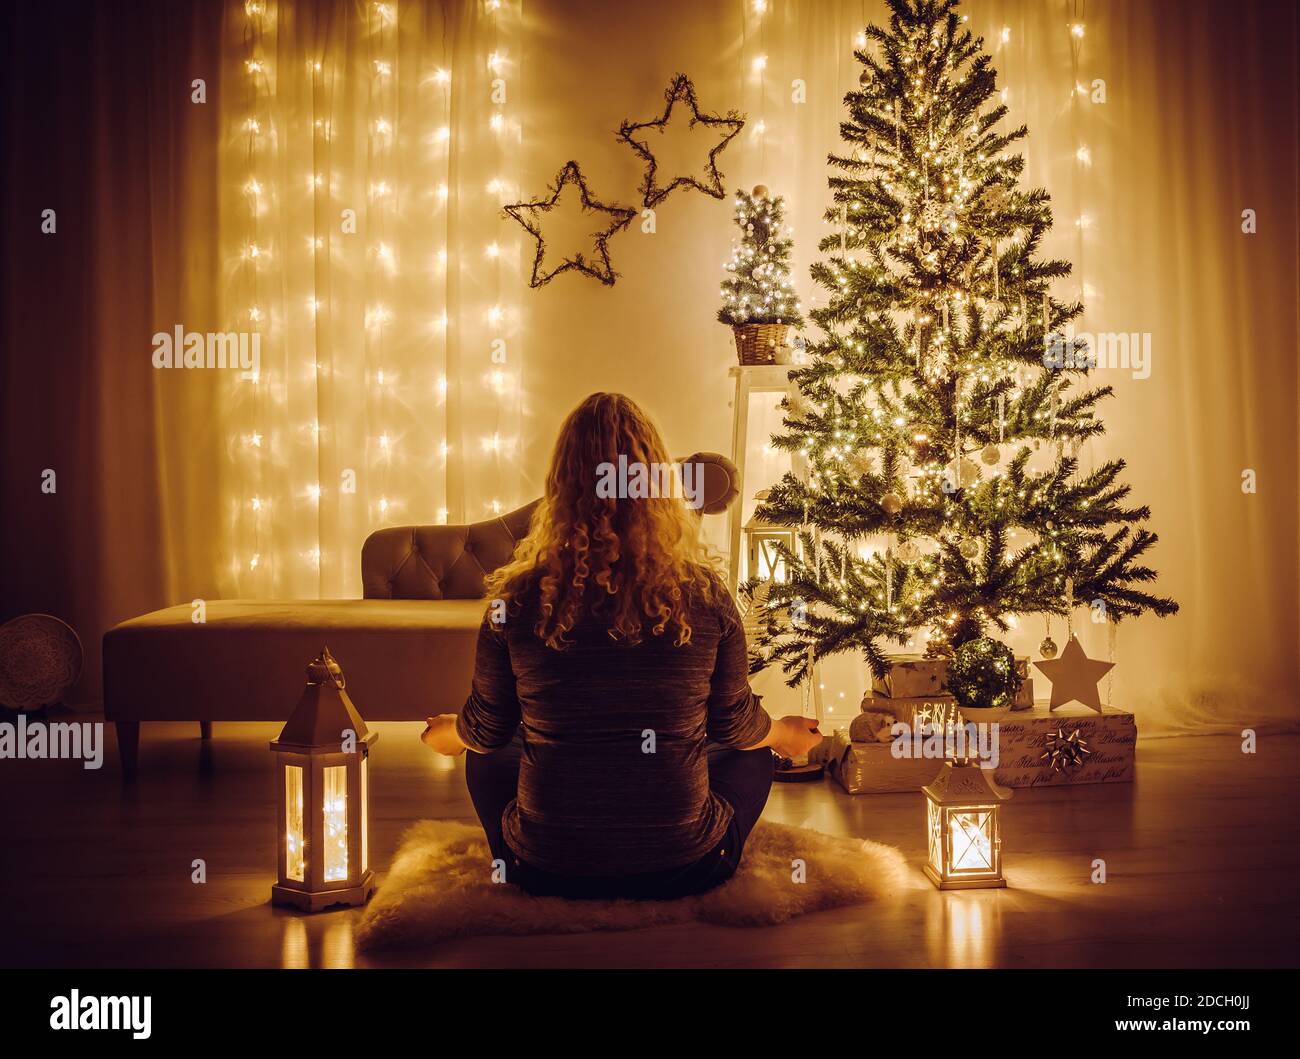 Woman sit on sheepskin rug and meditating. Tranquil relaxing Christmas Eve concept. Decorated Christmas tree with icicles and snowflake ornaments. Stock Photo